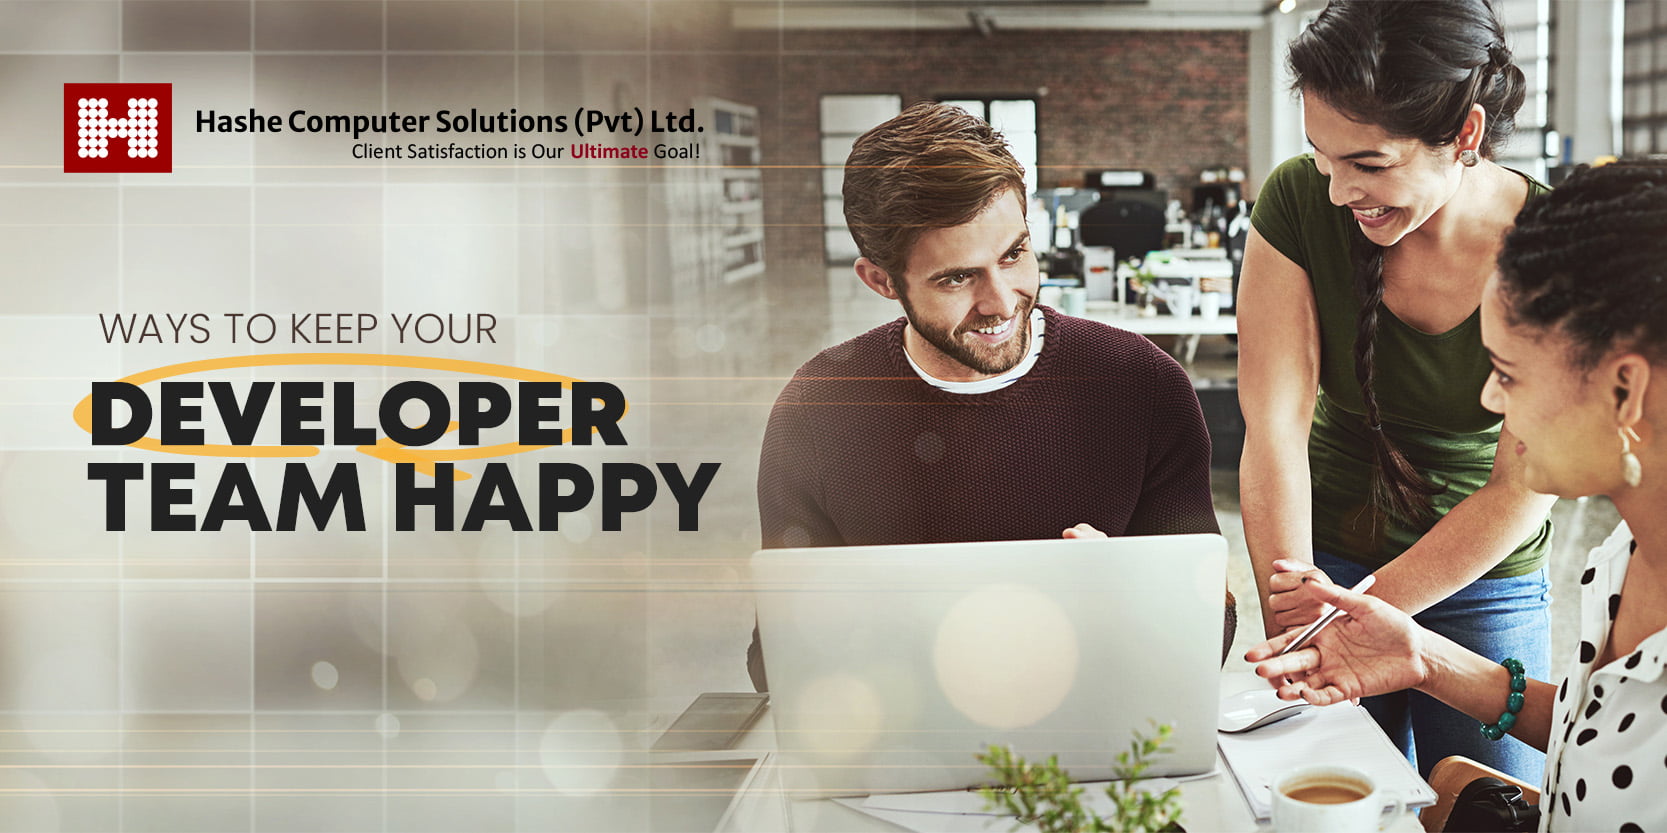 Ways to keep your developer team happy, Hashe Computer Solutions (Pvt) Ltd.